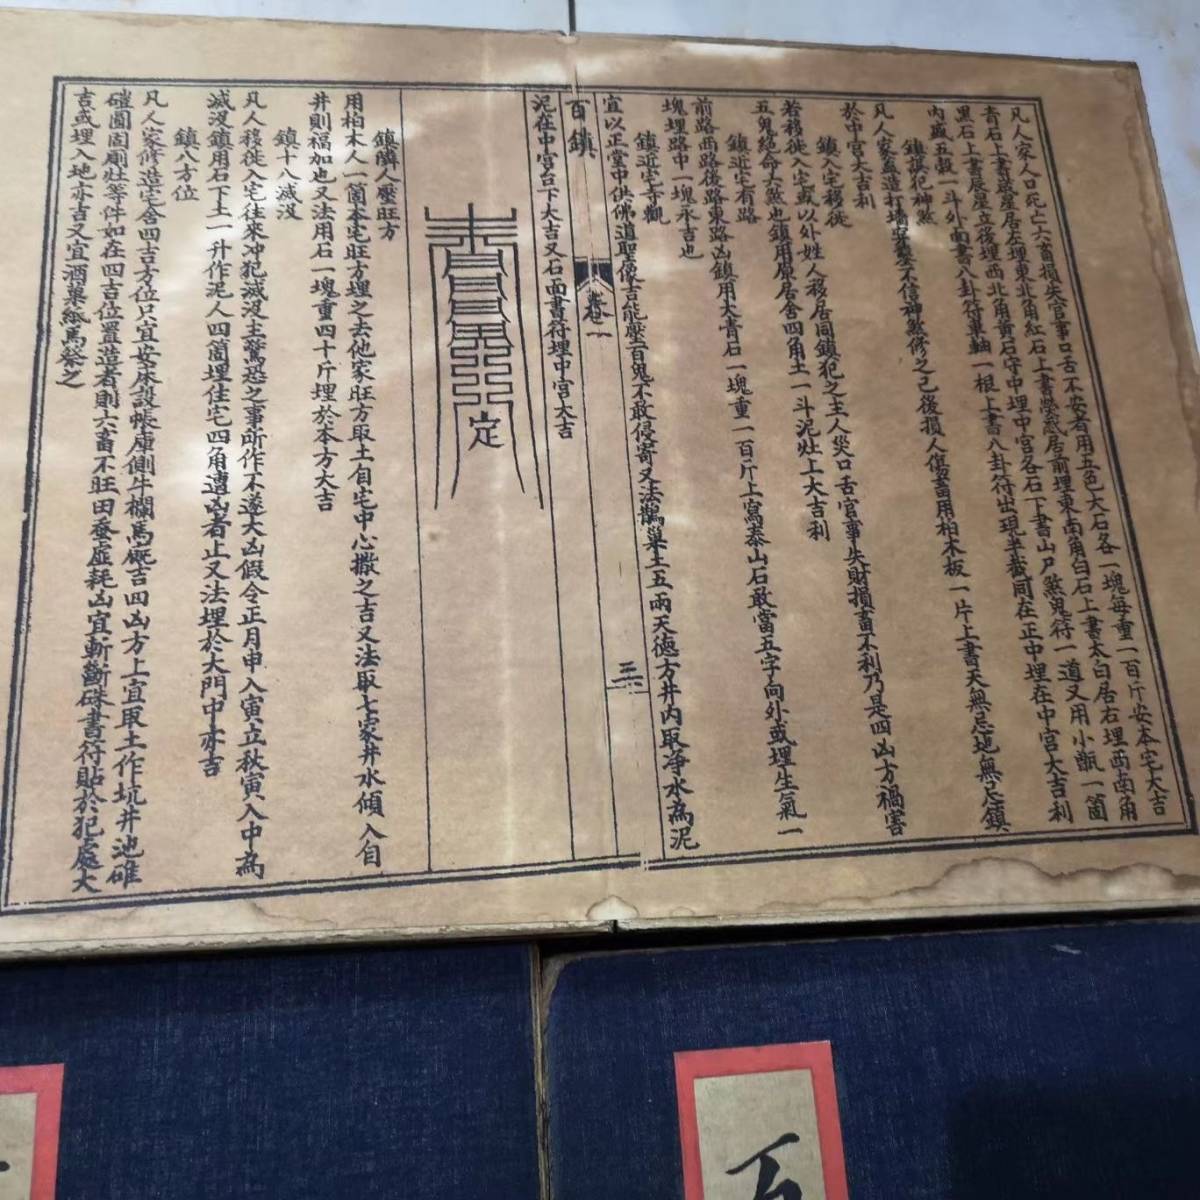 s6z3 old book rare article old warehouse Kiyoshi fee super rare line . China old book the whole 4 pcs. [ 100 . secretary ] China old document China old fine art fee thing feng shui medicine kind line equipment paper 